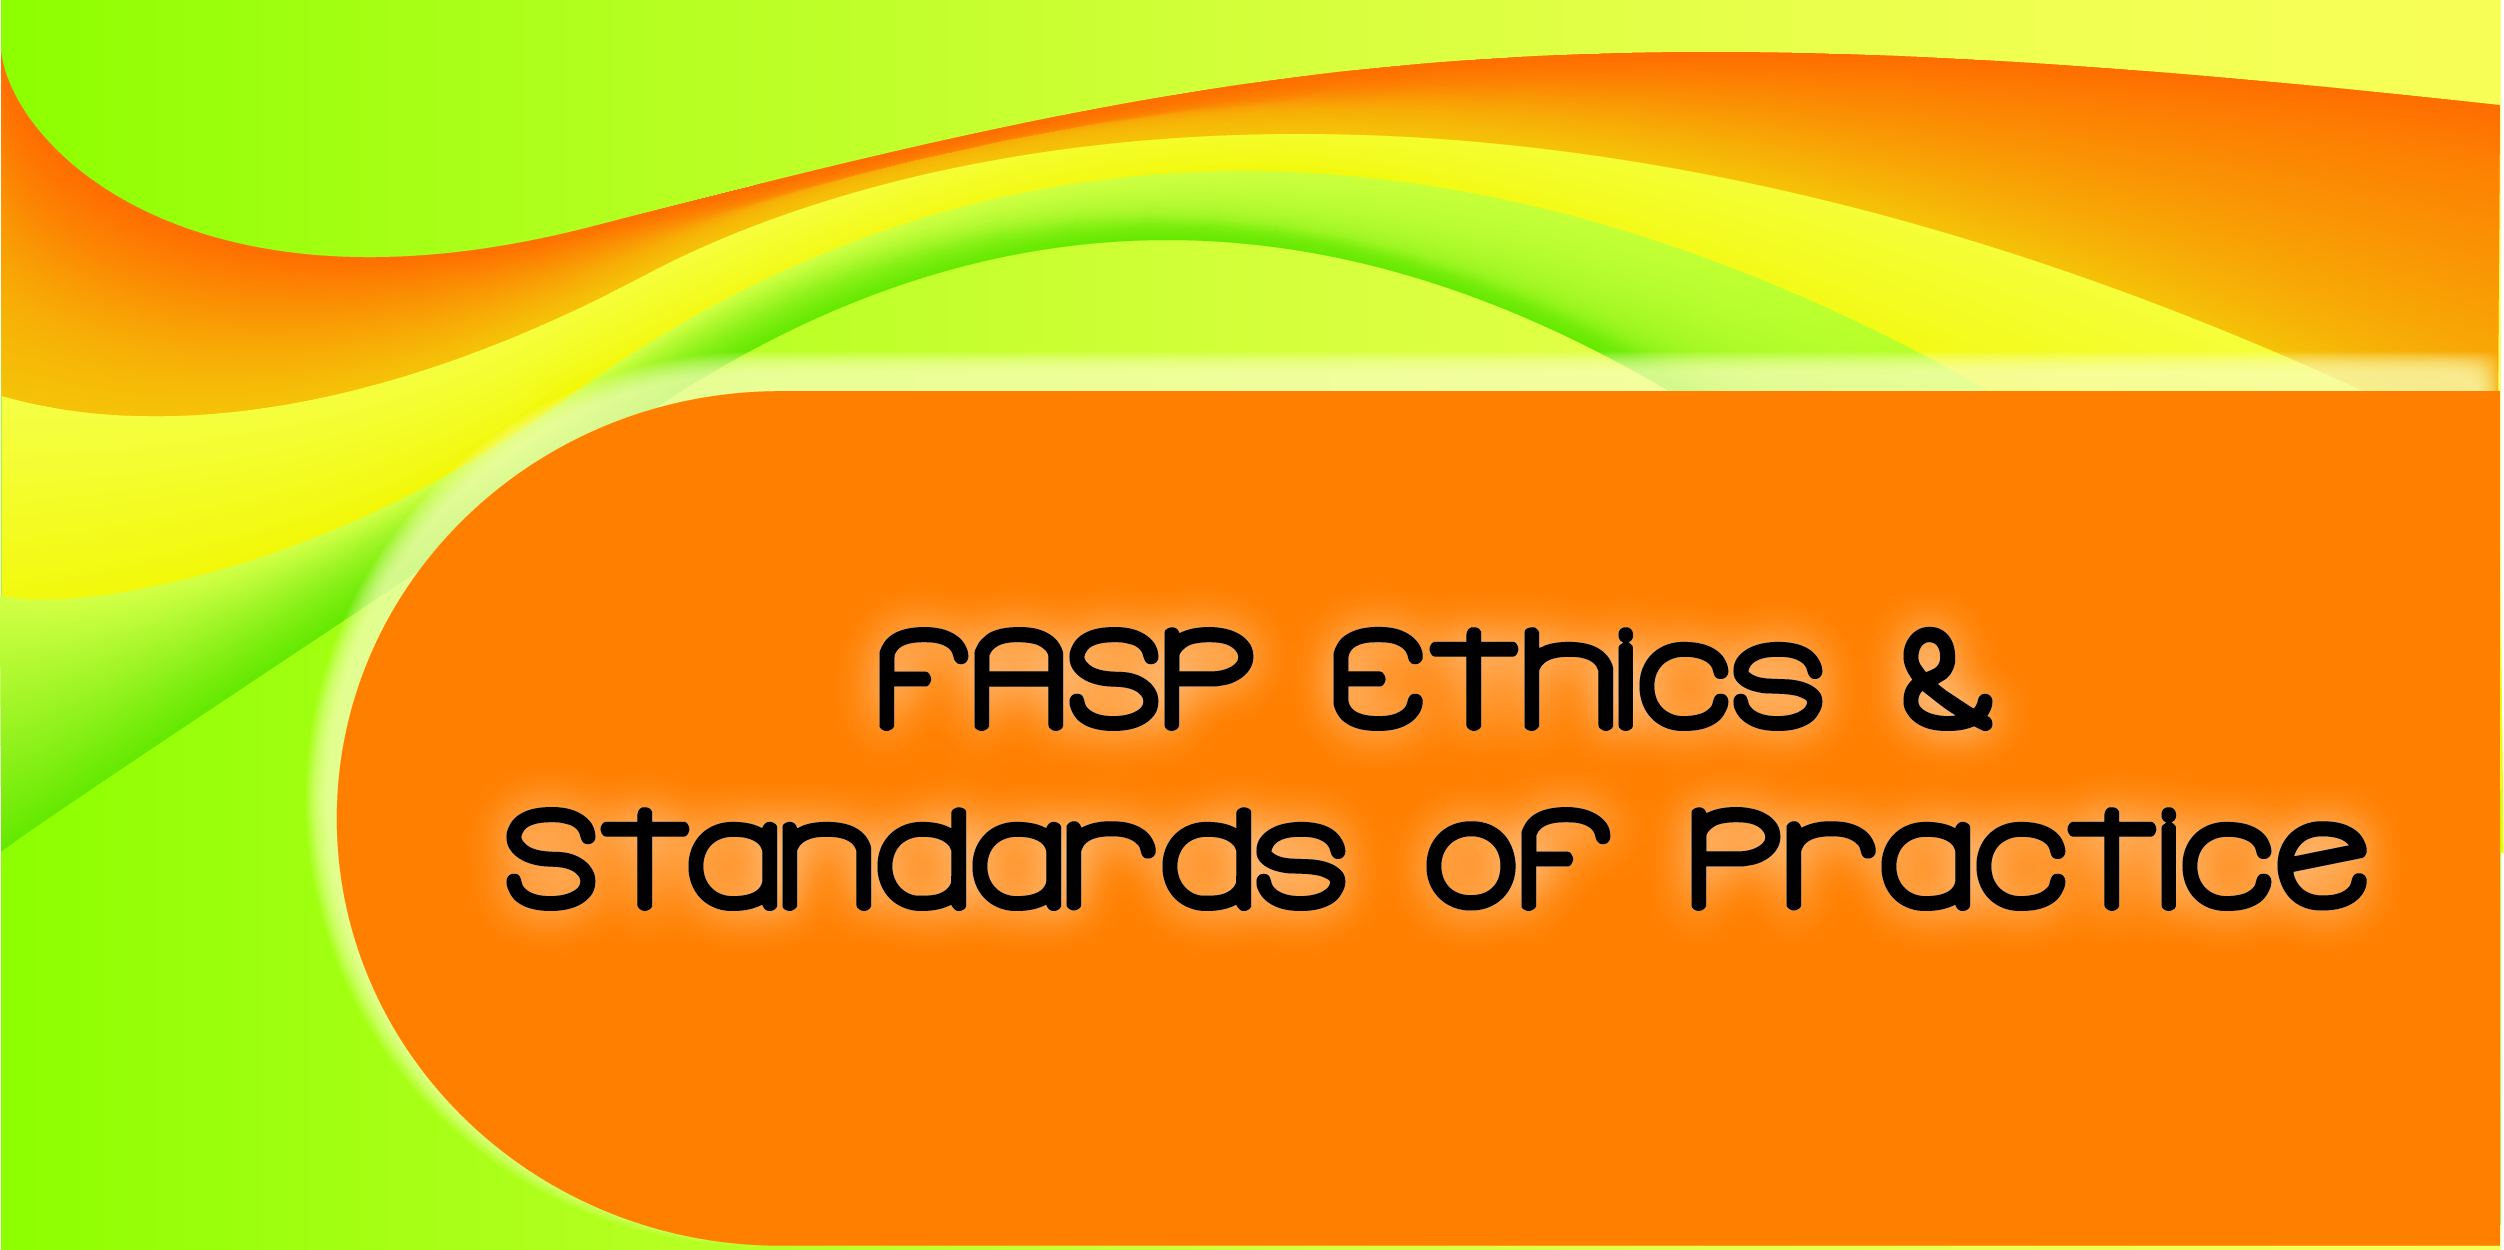 FASP Ethics & Standards of Practice